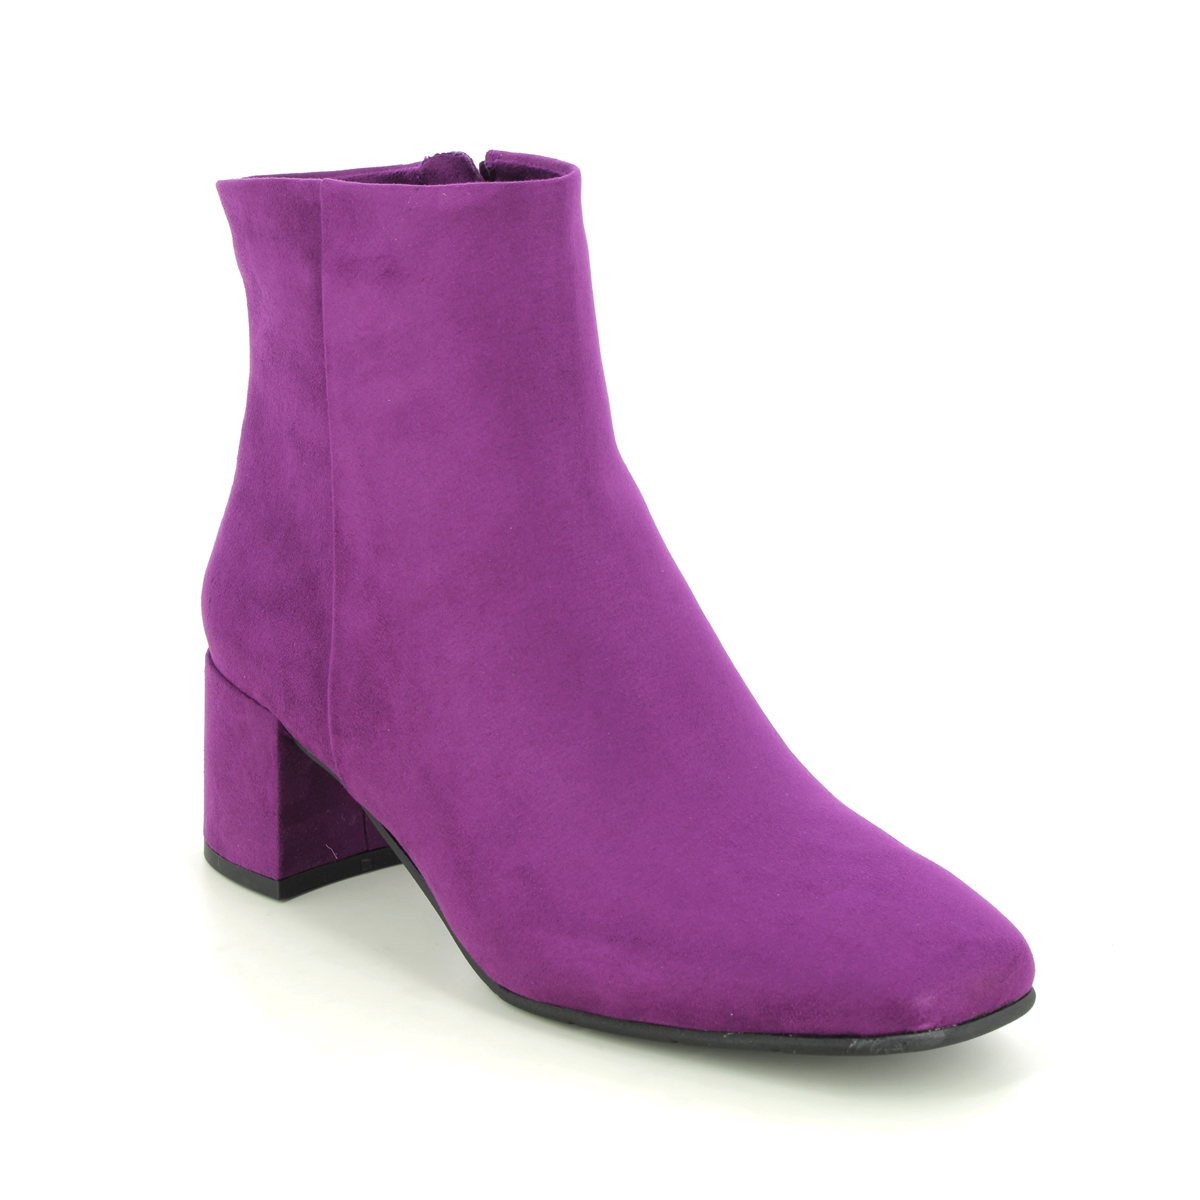 Marco Tozzi Vacco Purple Womens Heeled Boots 25349-41-587 in a Plain Textile in Size 40